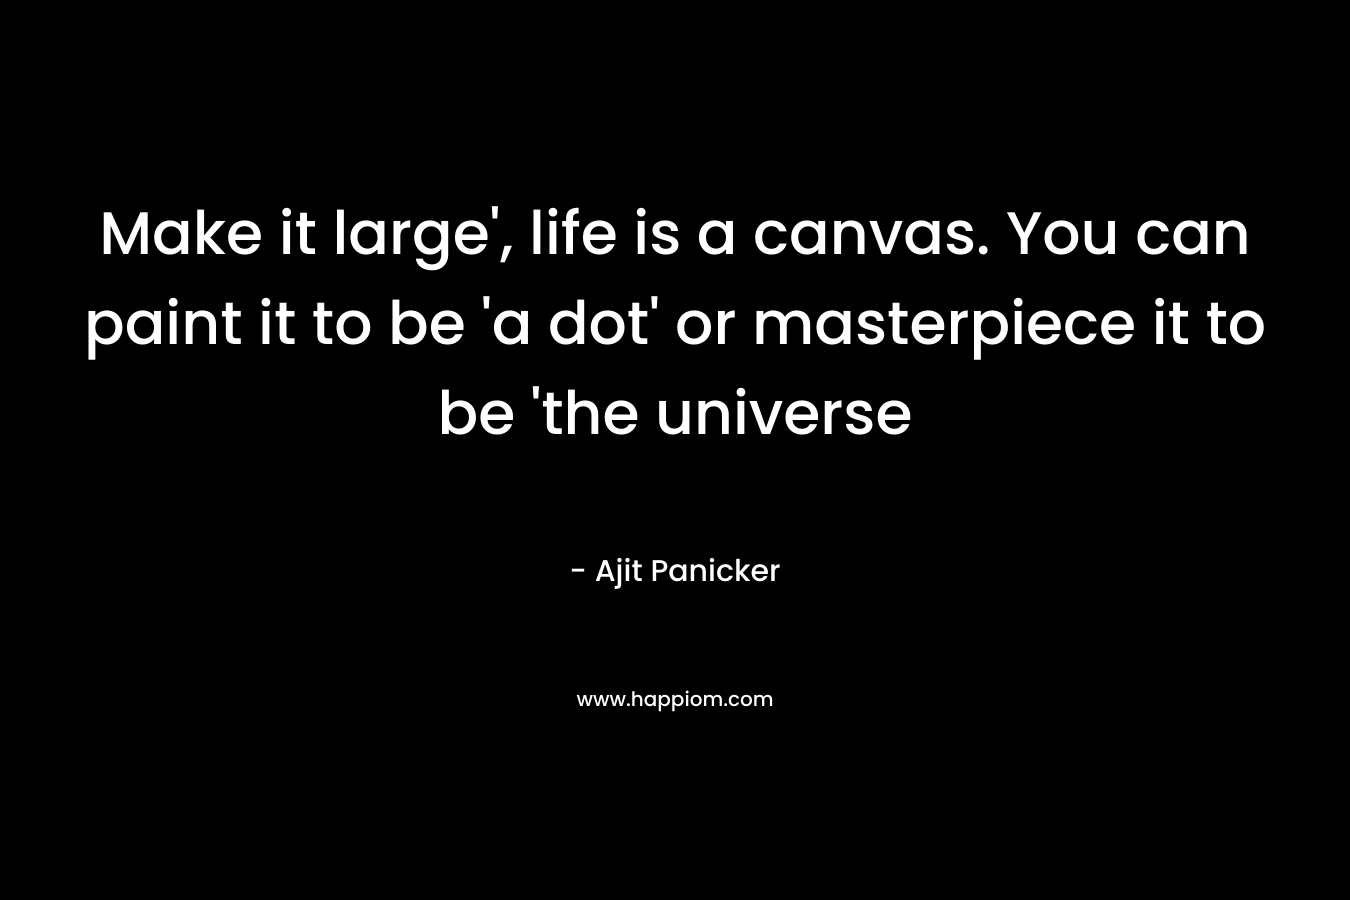 Make it large’, life is a canvas. You can paint it to be ‘a dot’ or masterpiece it to be ‘the universe – Ajit Panicker